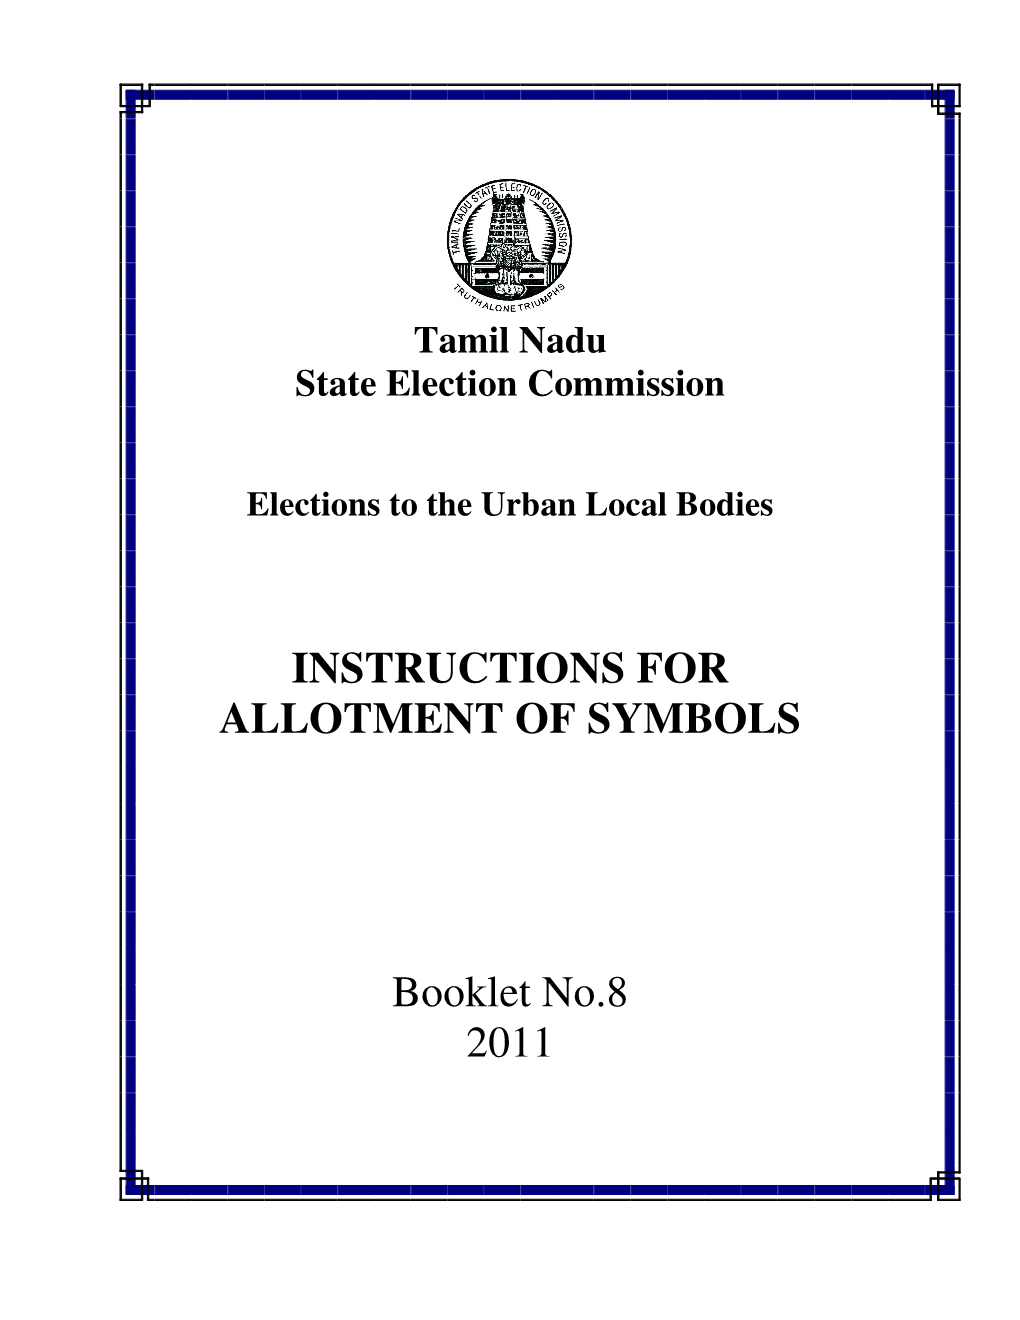 State Election Commission Booklet No.8